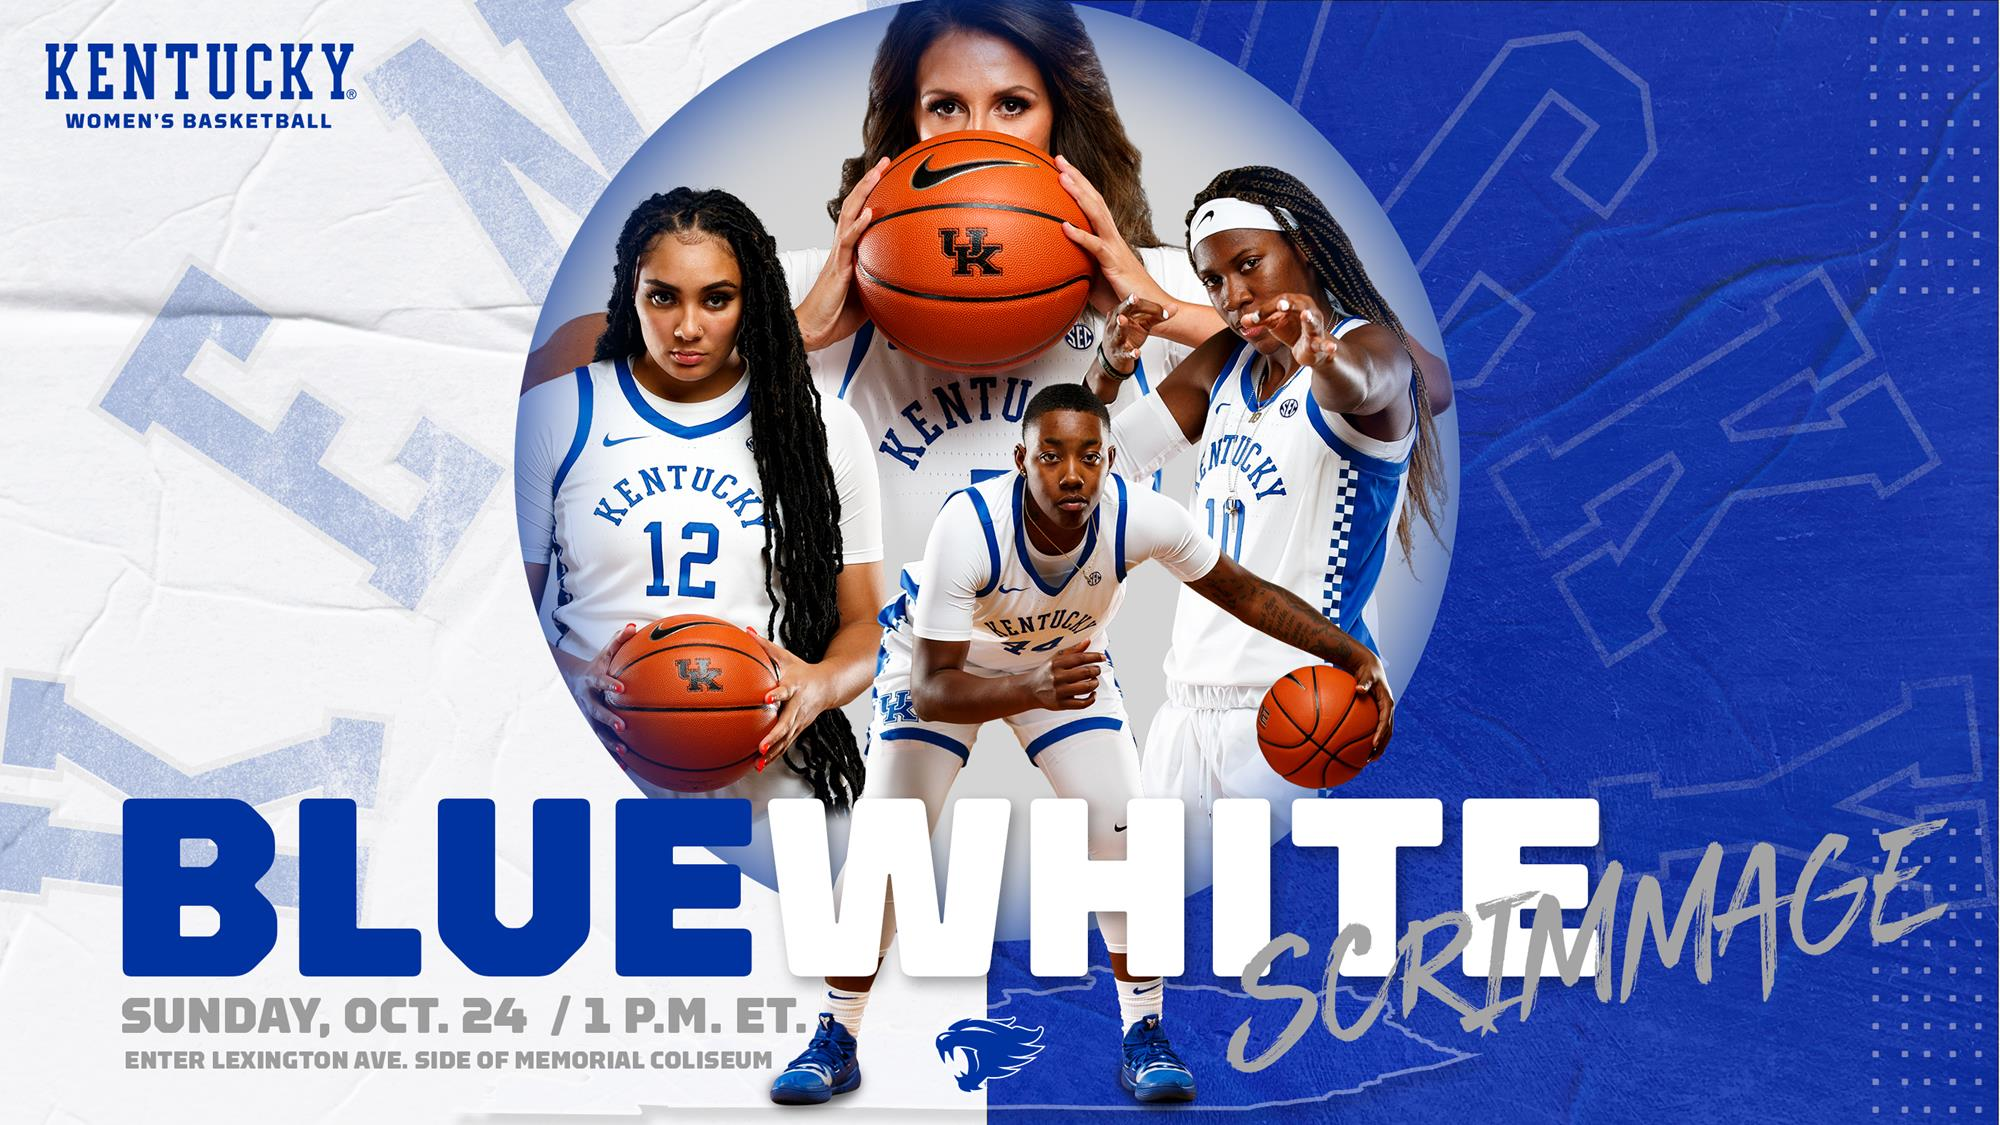 Kentucky WBB Blue-White Scrimmage Set for Oct. 24